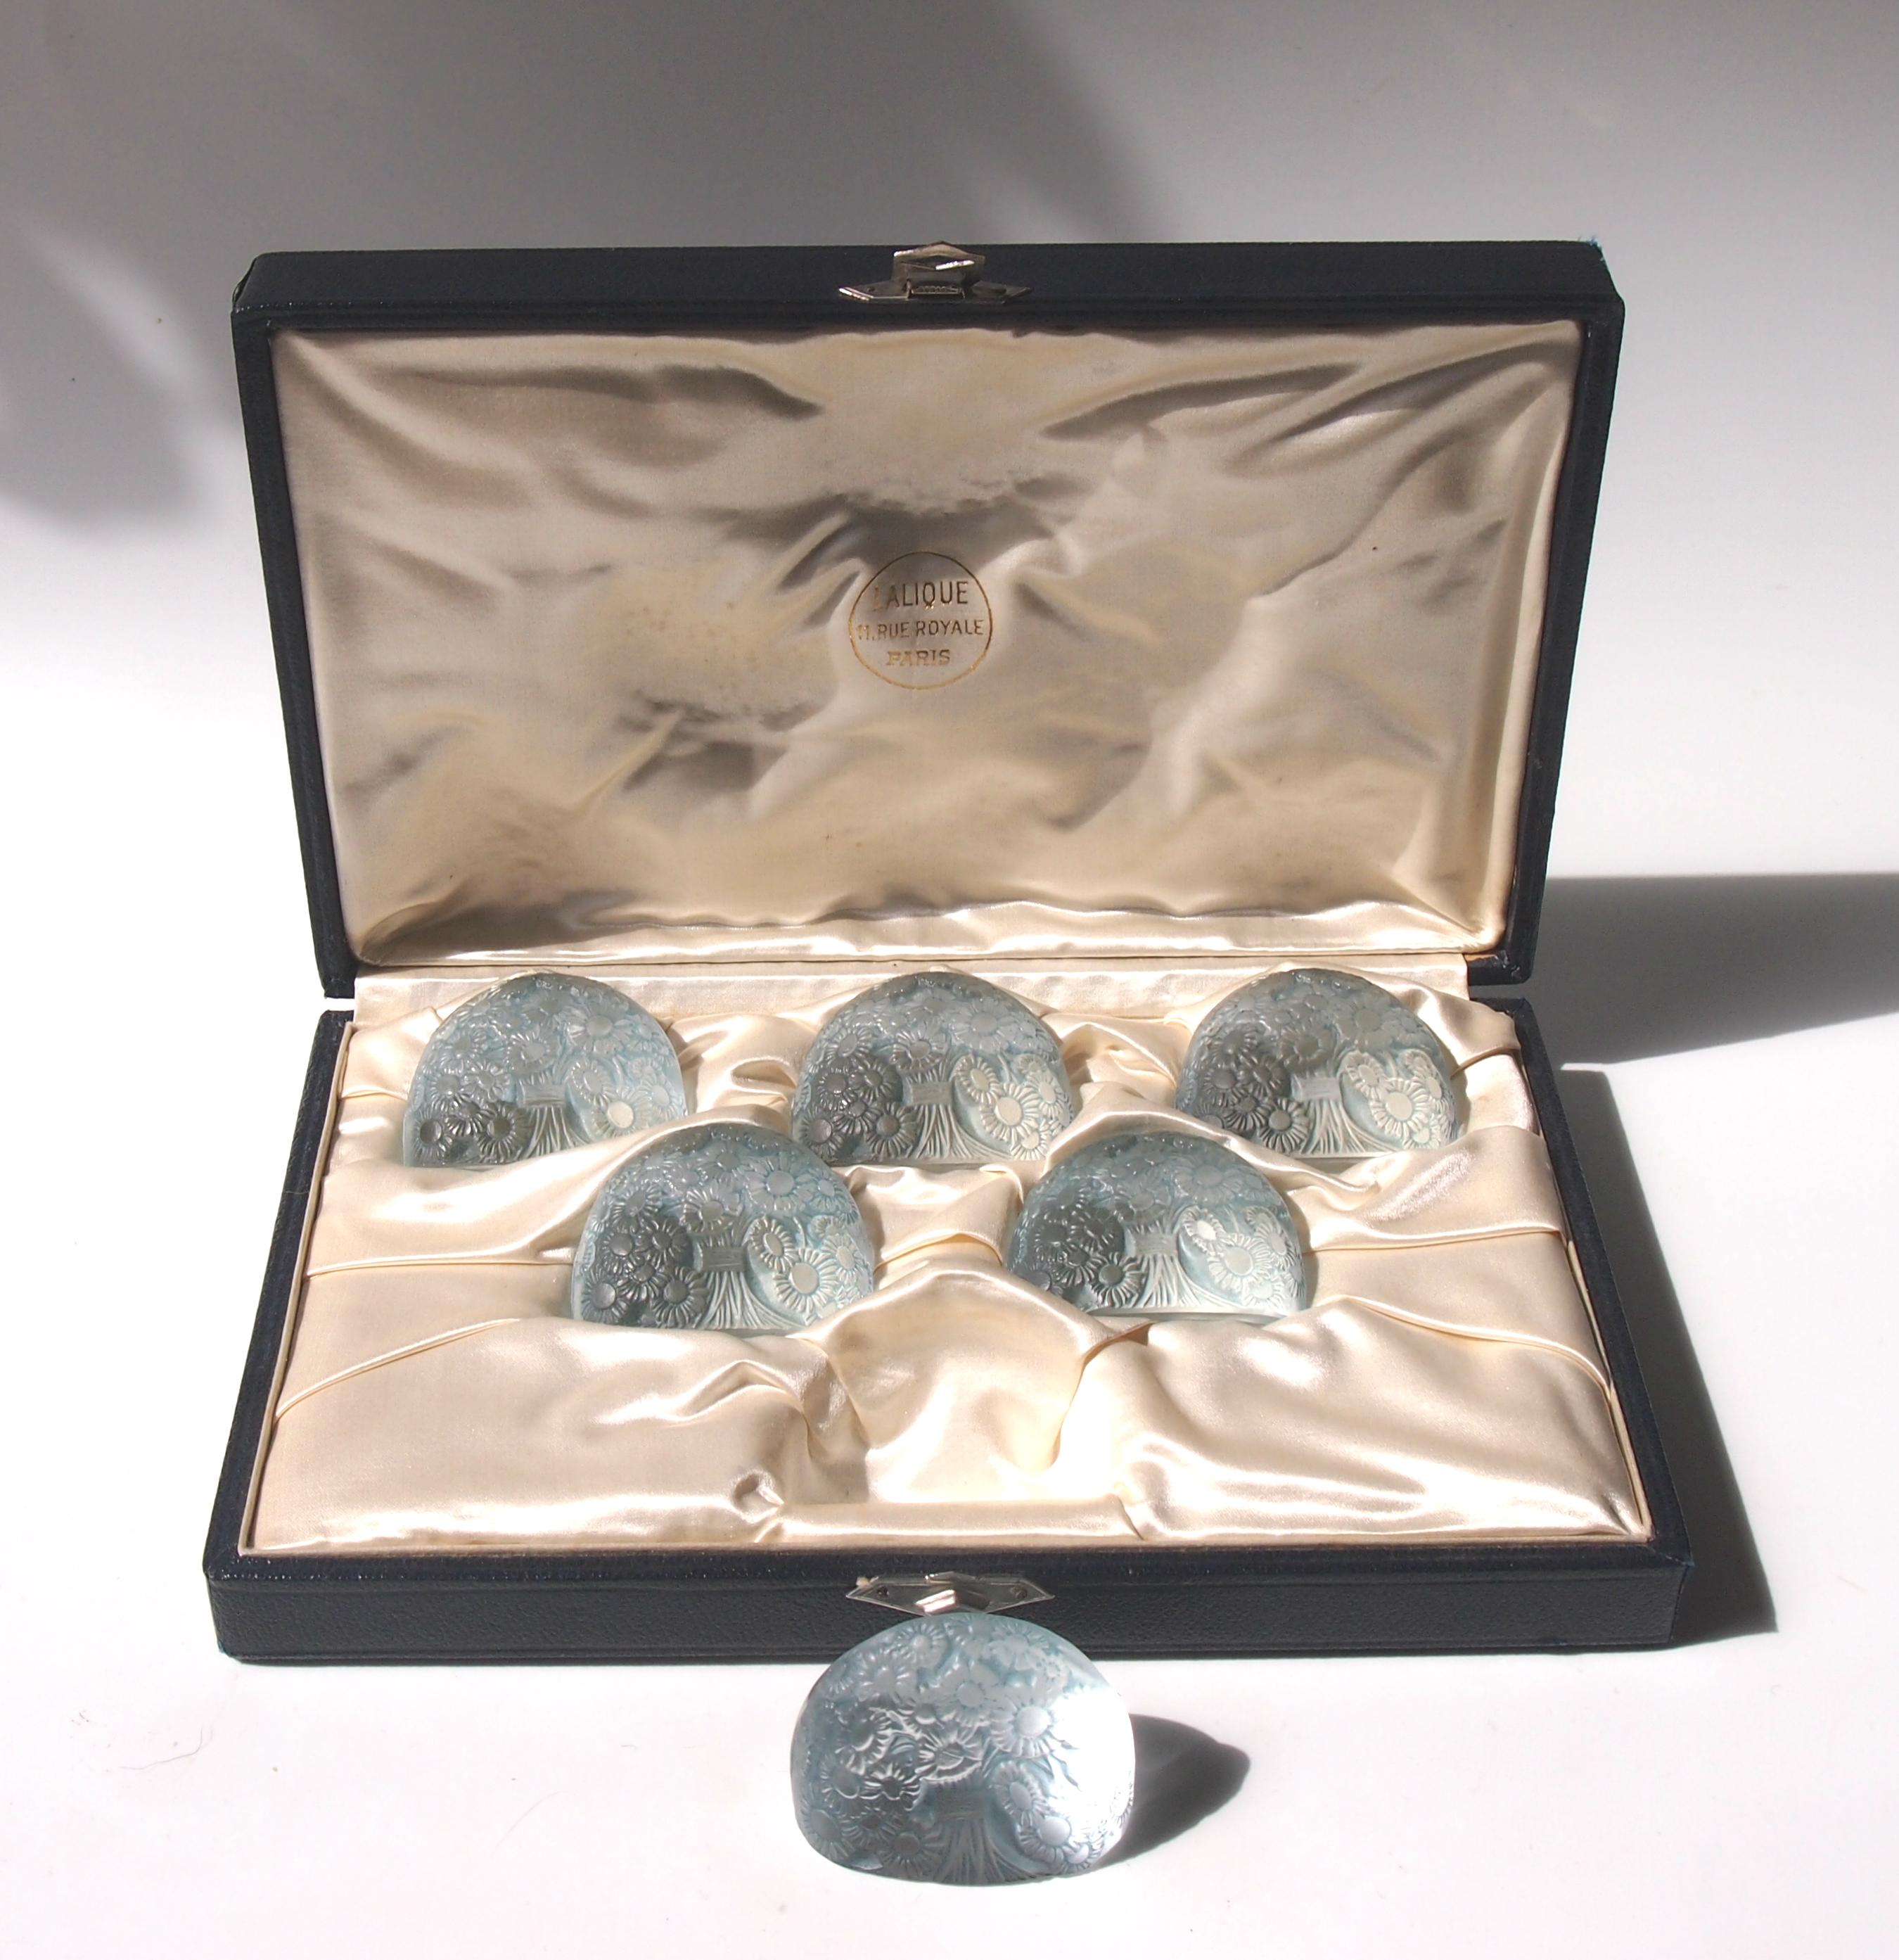 Amazing boxed set of six glass Rene Lalique Marguerites (Daisies) pattern menu holders, dating around 1924 with original blue staining. (Ref: Marcilhac 3505) These were called (Porte-Menu) -Menu holders by Rene Lalique, but they also act a place